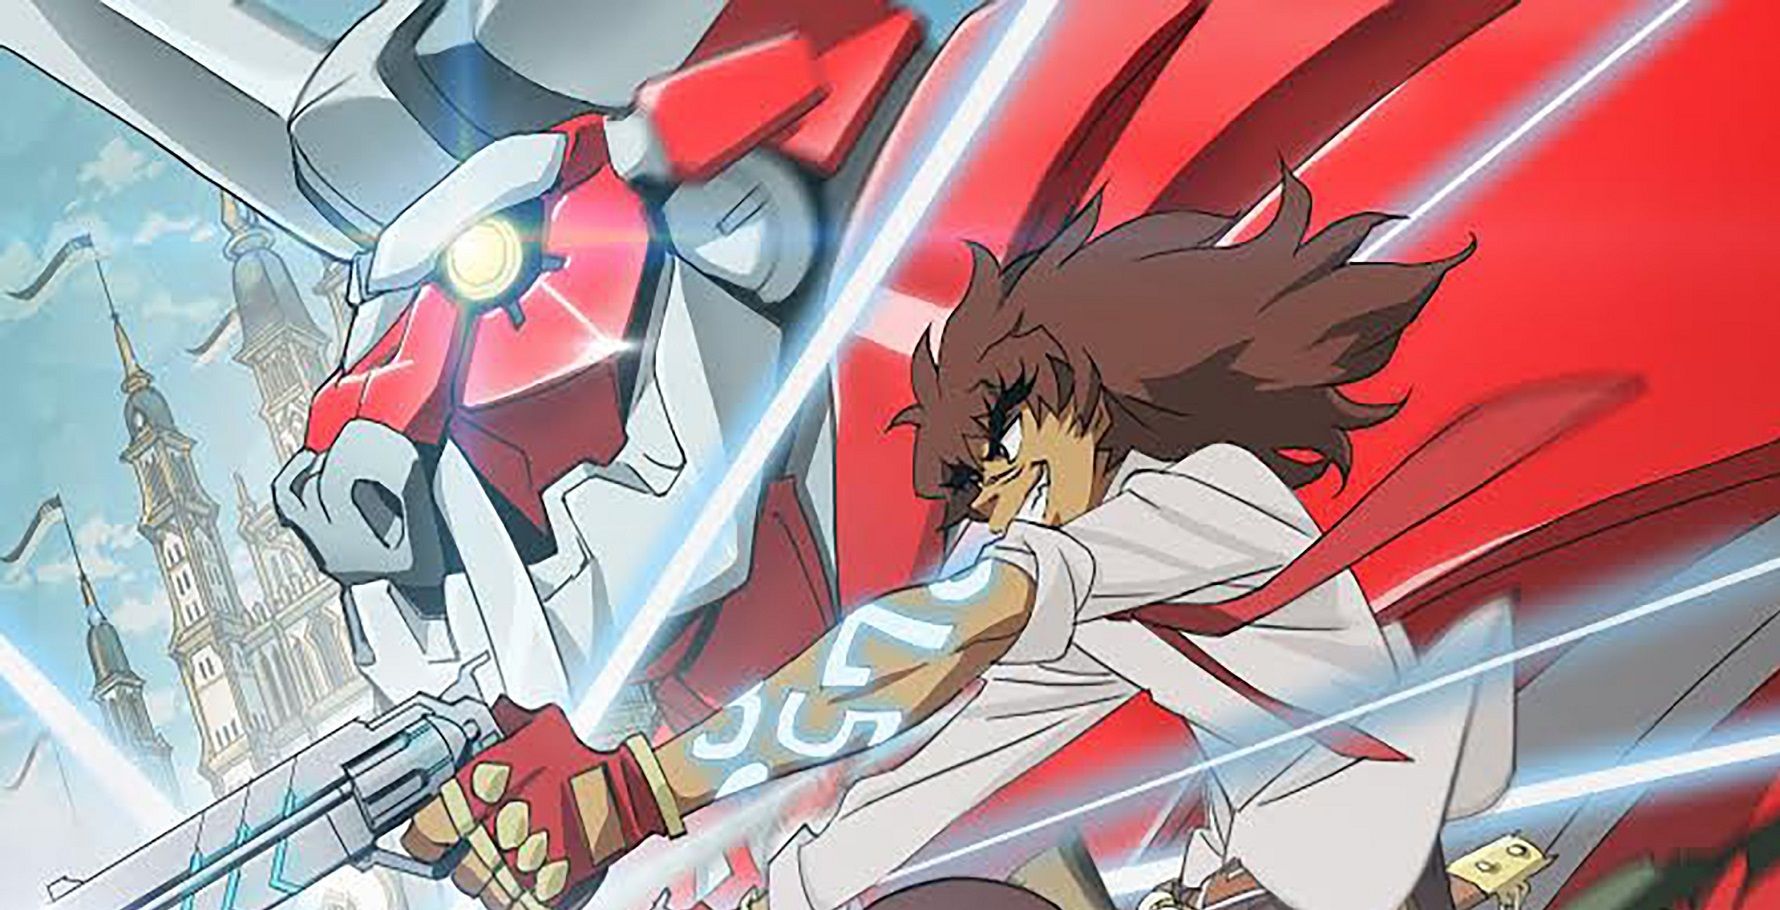 Cannon Busters' Review: Netflix Anime Series Is a '90s Throwback